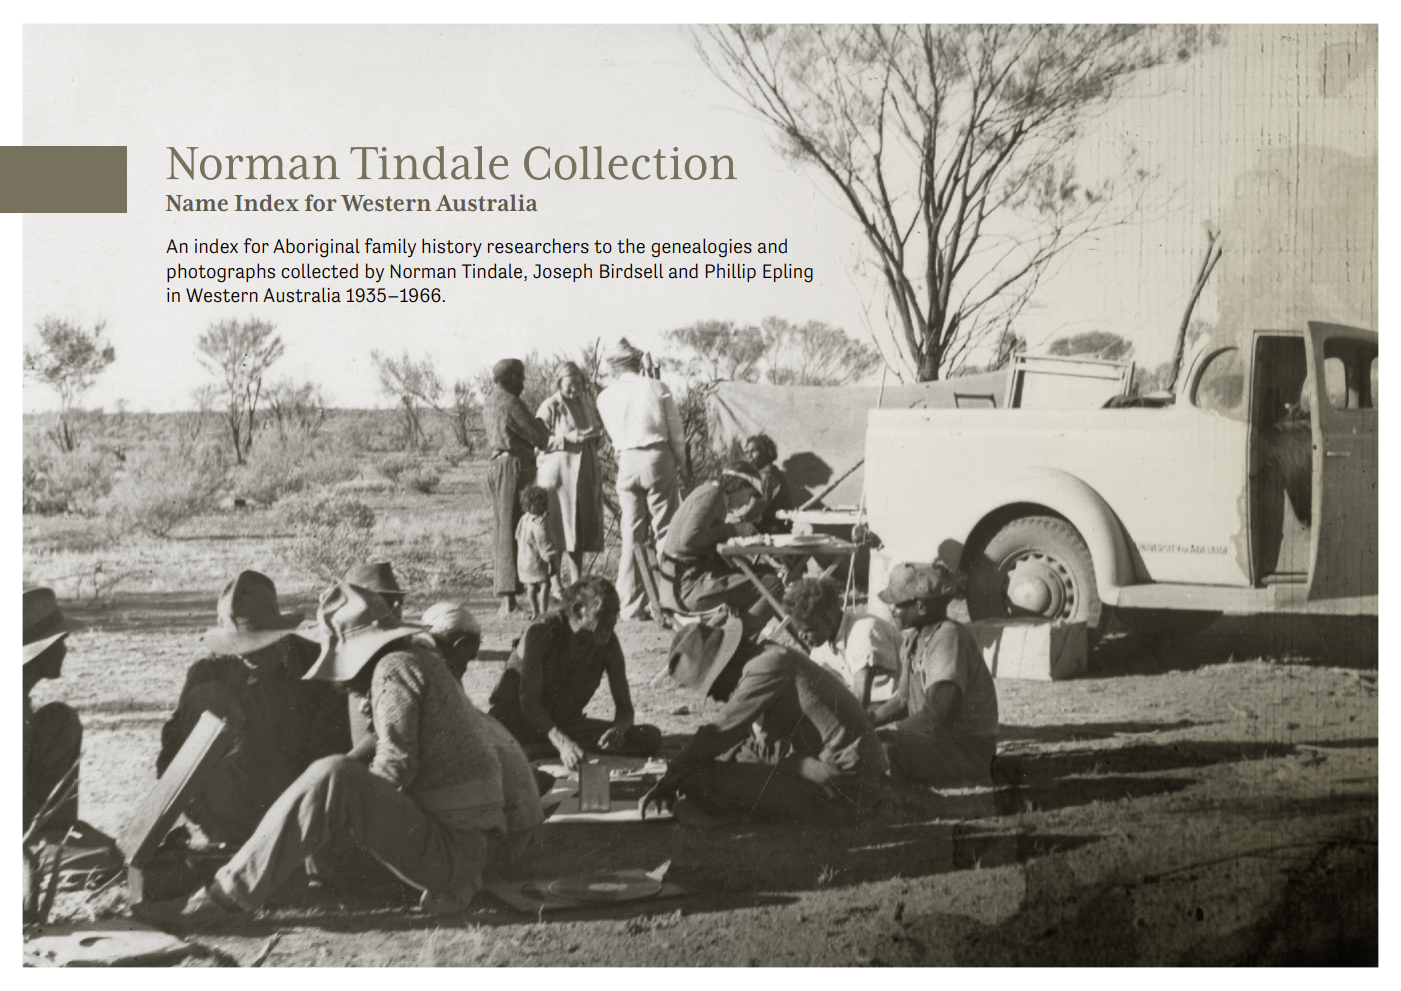 Norman Tindale Collection cover showing an old photograph